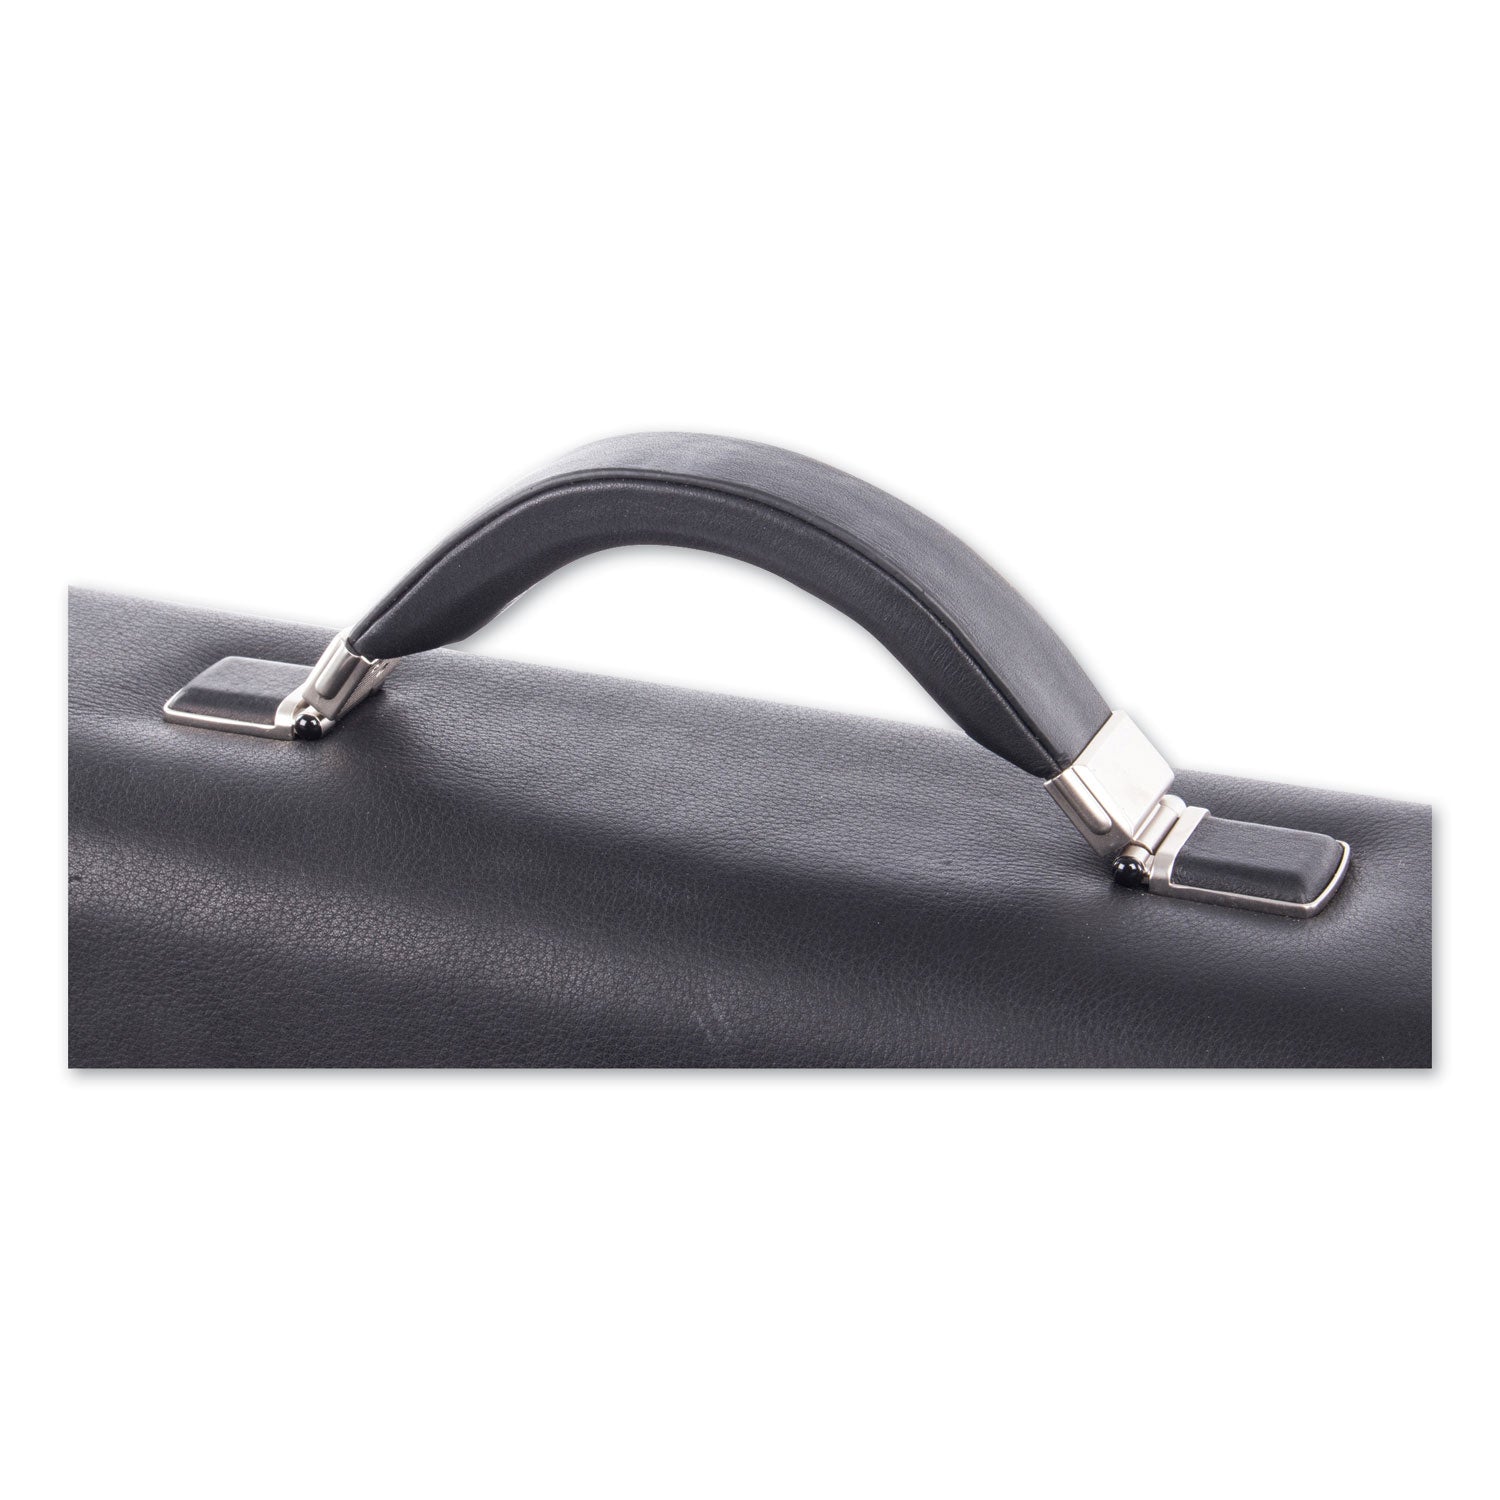 milestone-briefcase-fits-devices-up-to-156-leather-5-x-5-x-12-black_swz49545801sm - 7